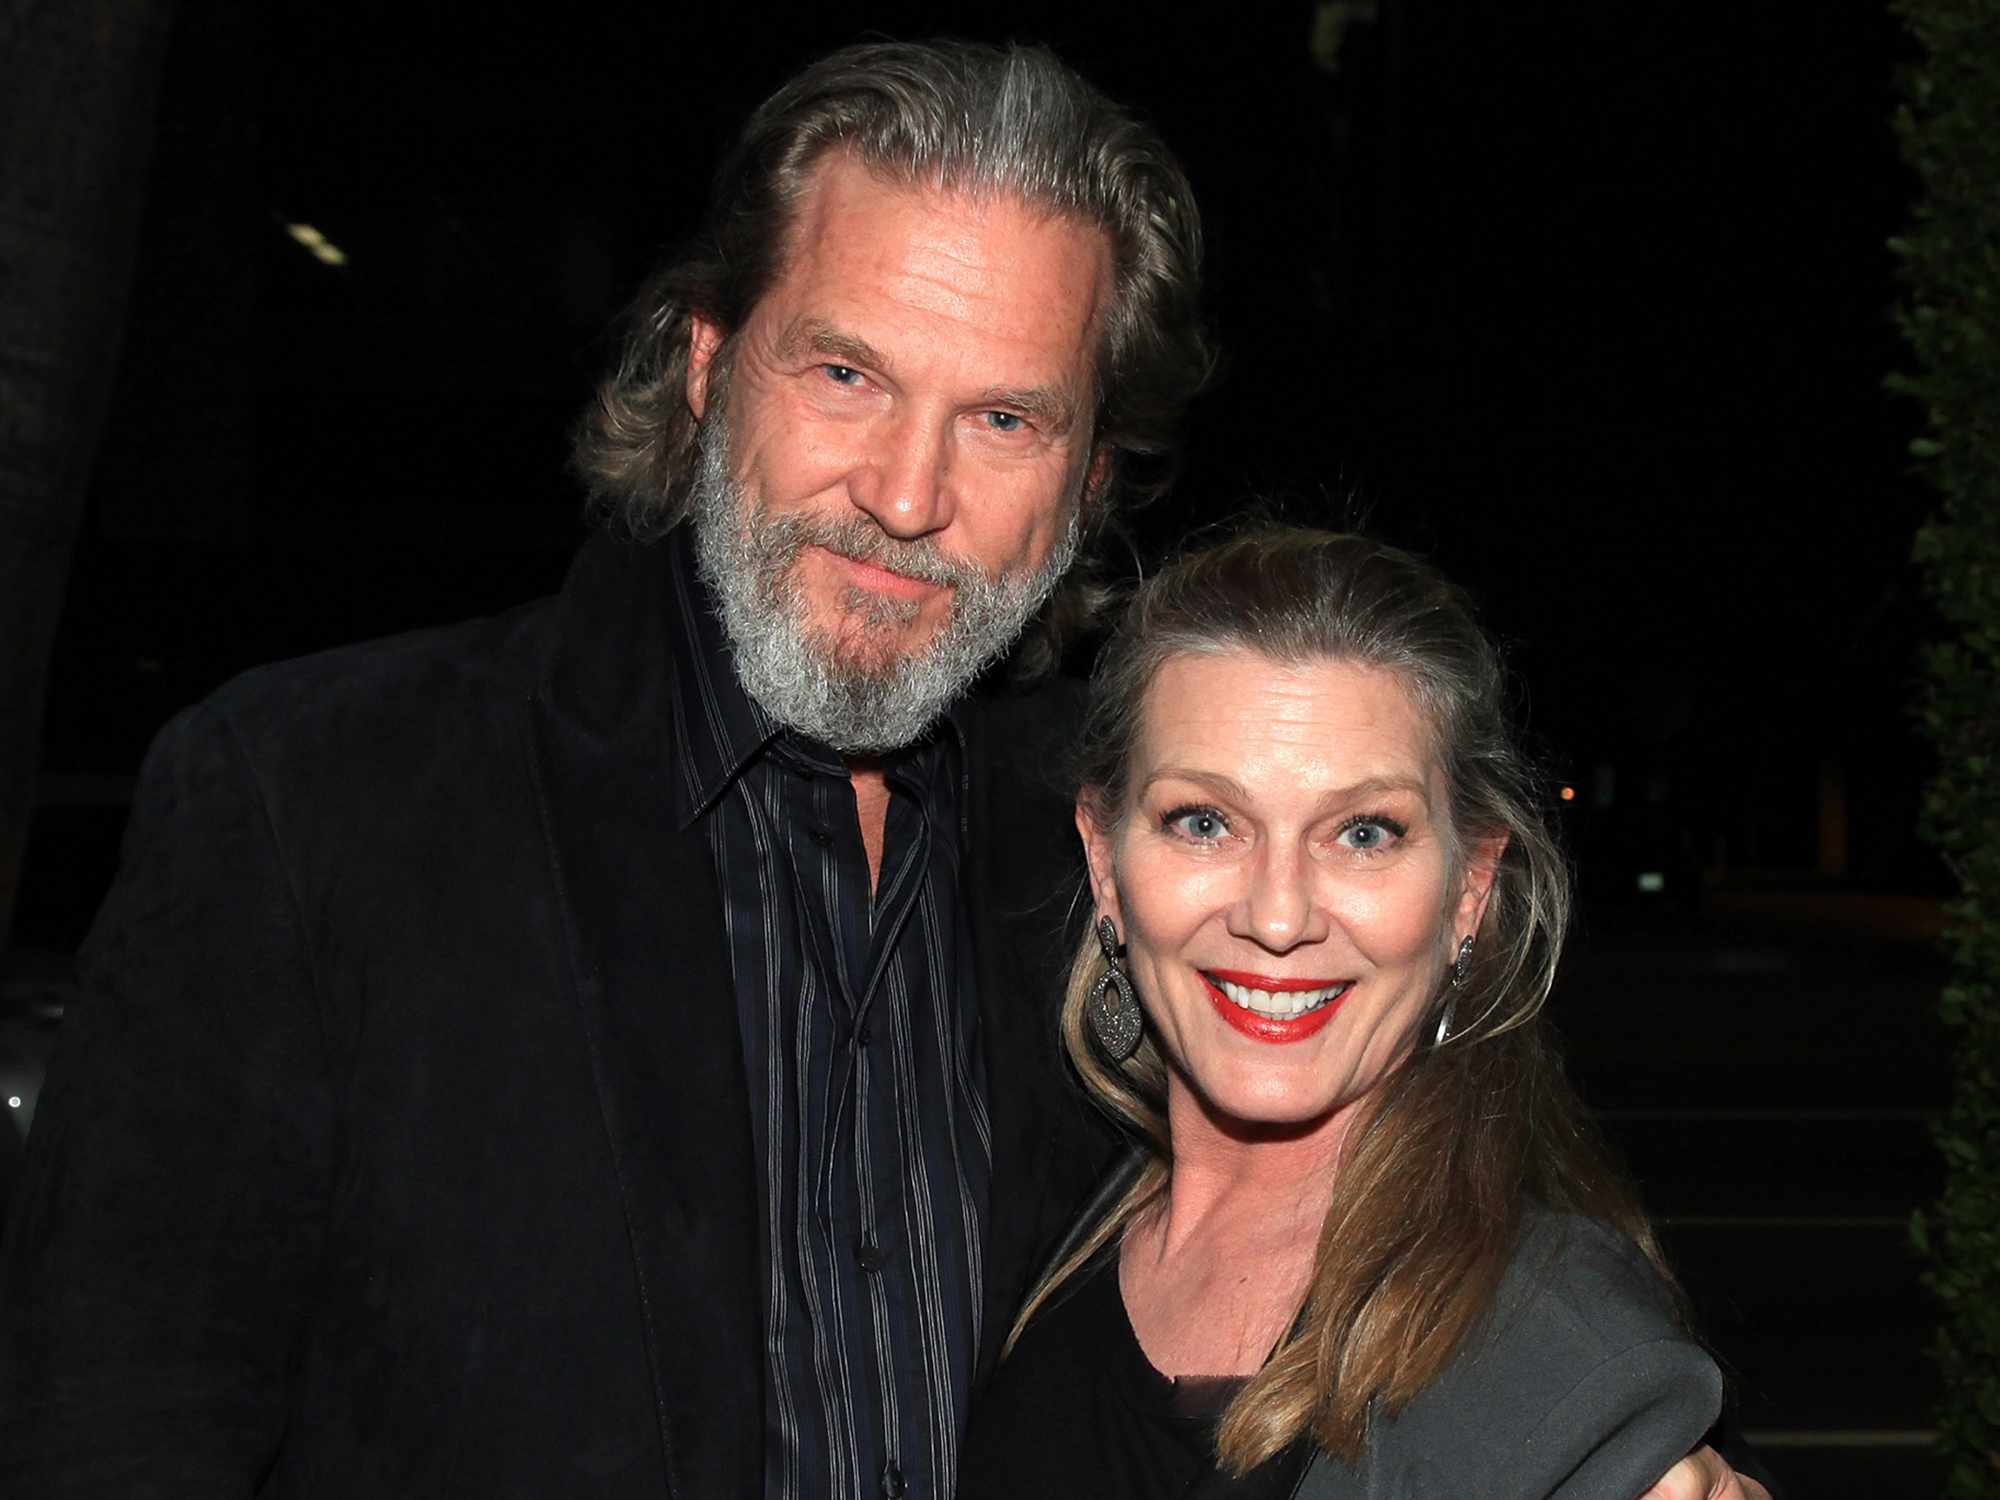 Jeff and Susan Bridges attend the screening of Paramount Pictures' 'True Grit' at the Academy of Motion Picture Arts and Sciences on December 9, 2010 in Beverly Hills, California